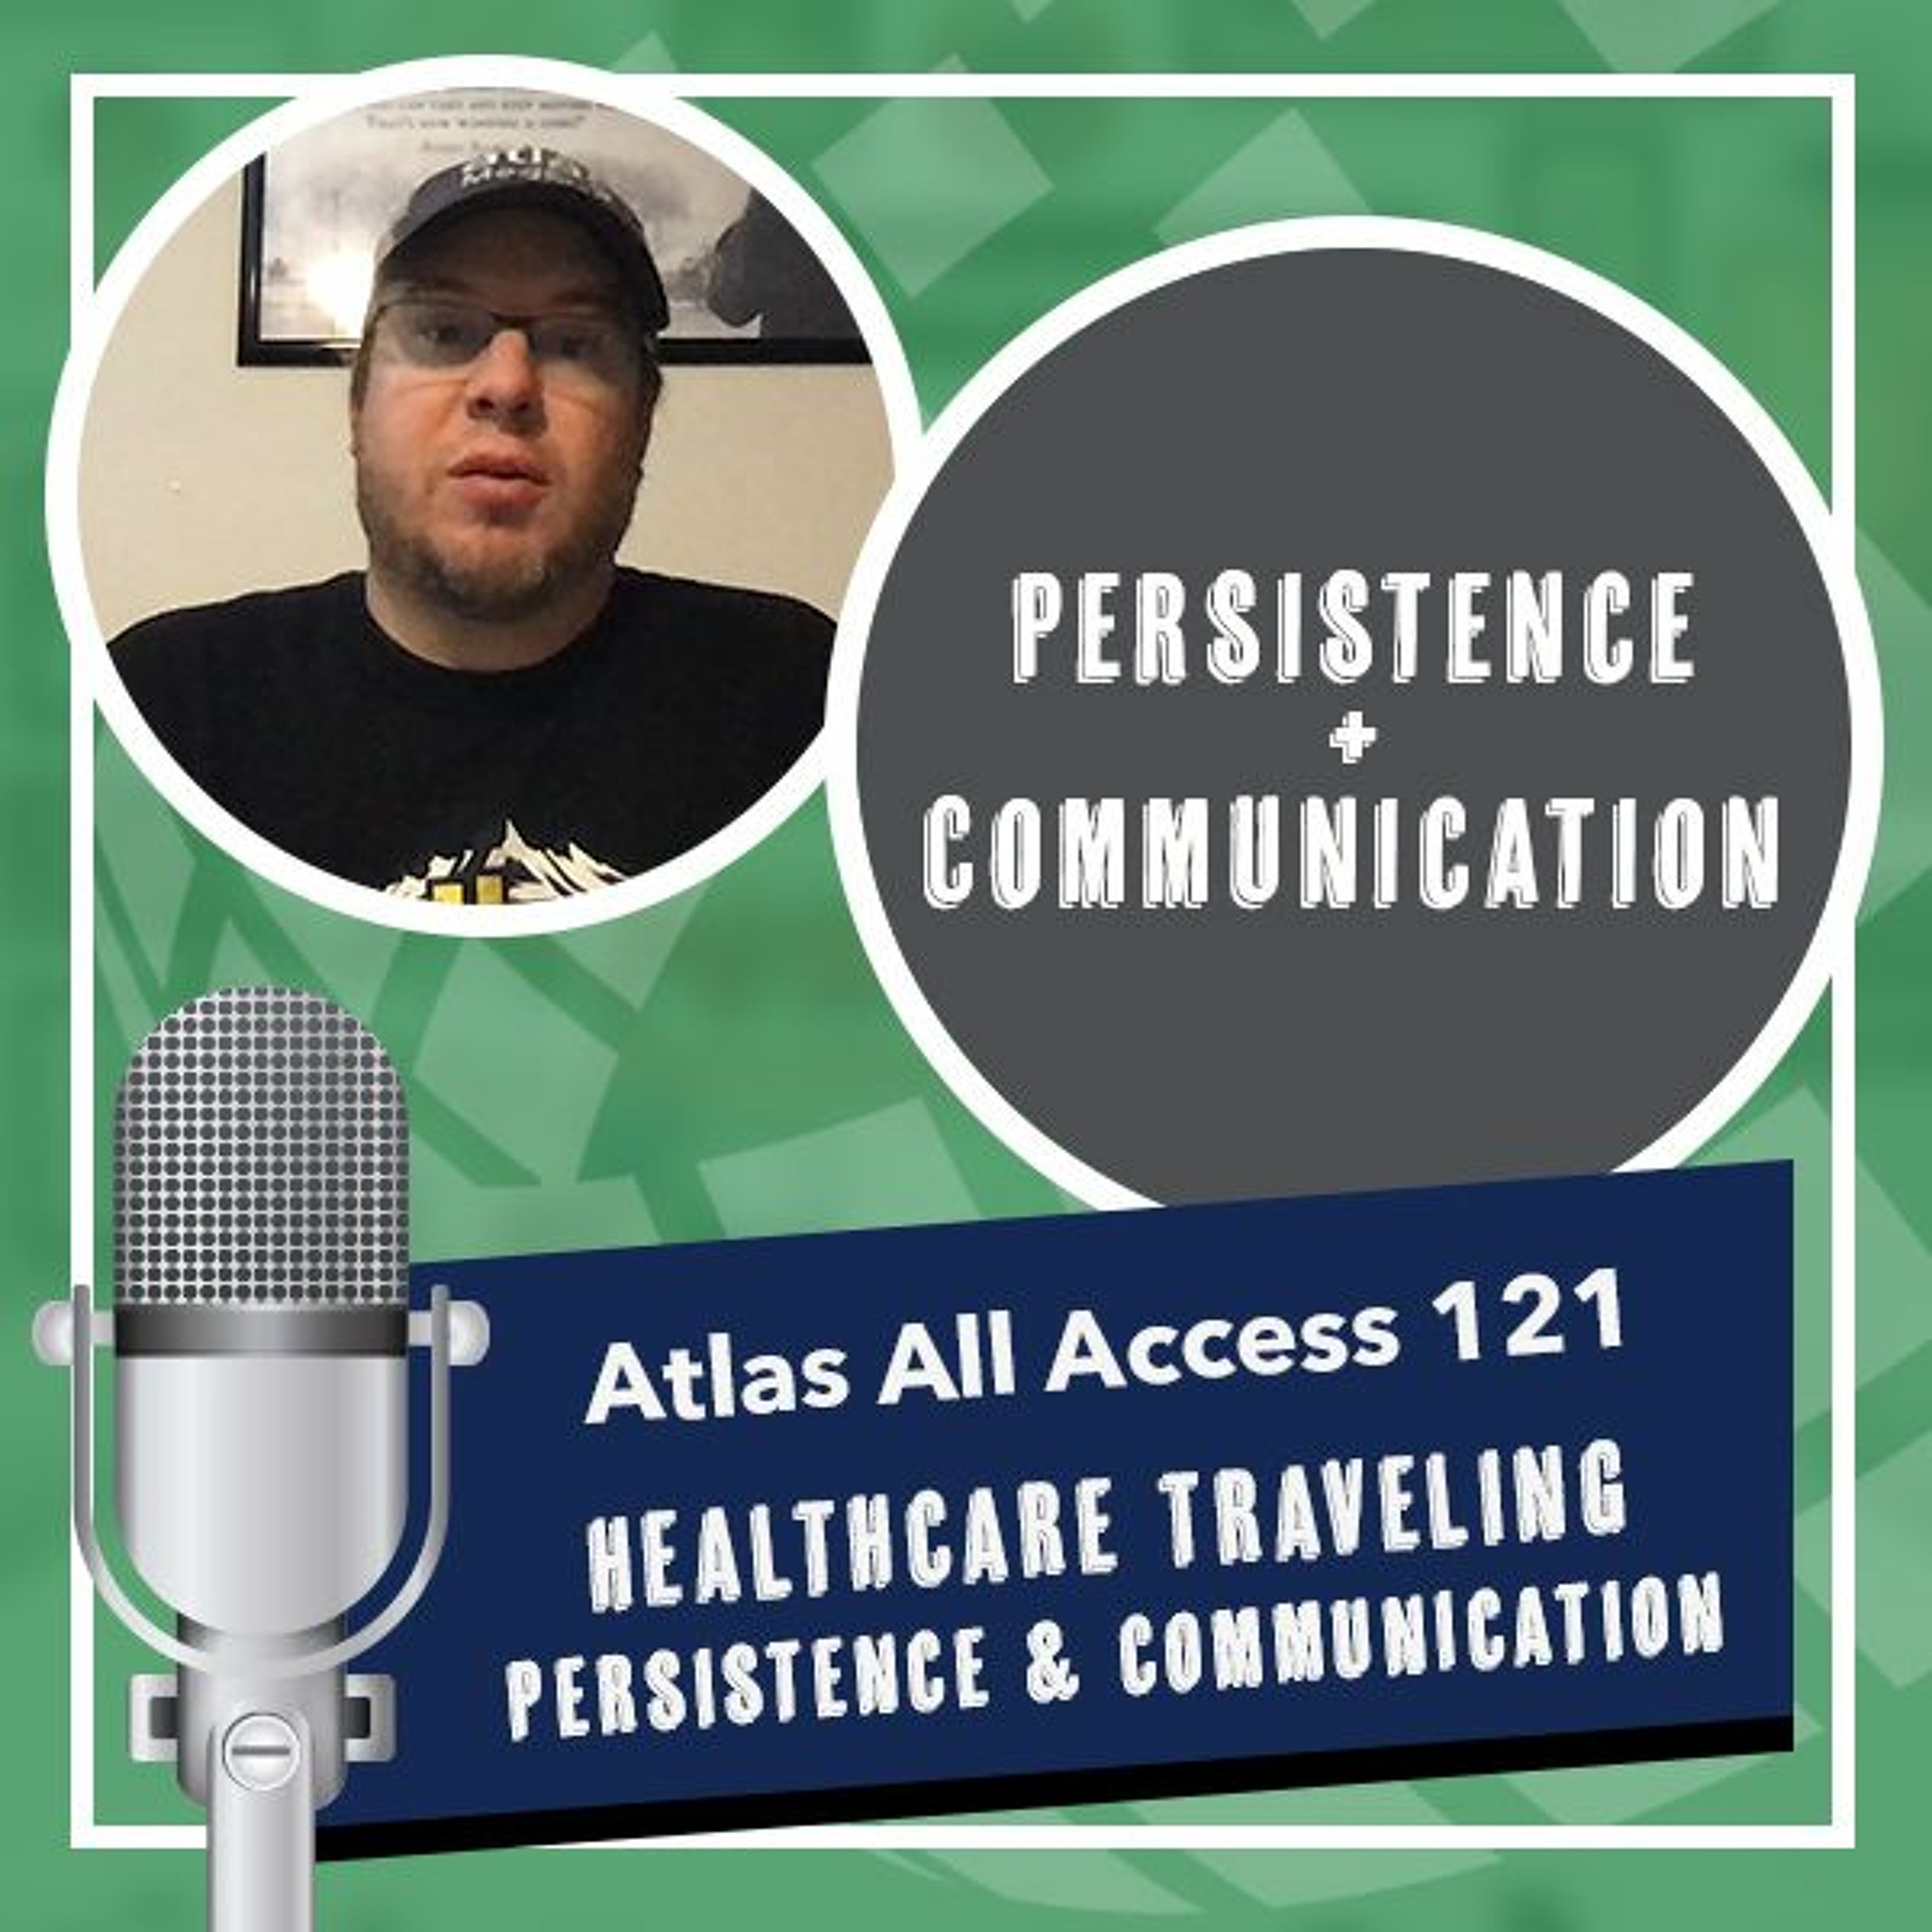 Persistence and communication during challenging times - Atlas All Access 121